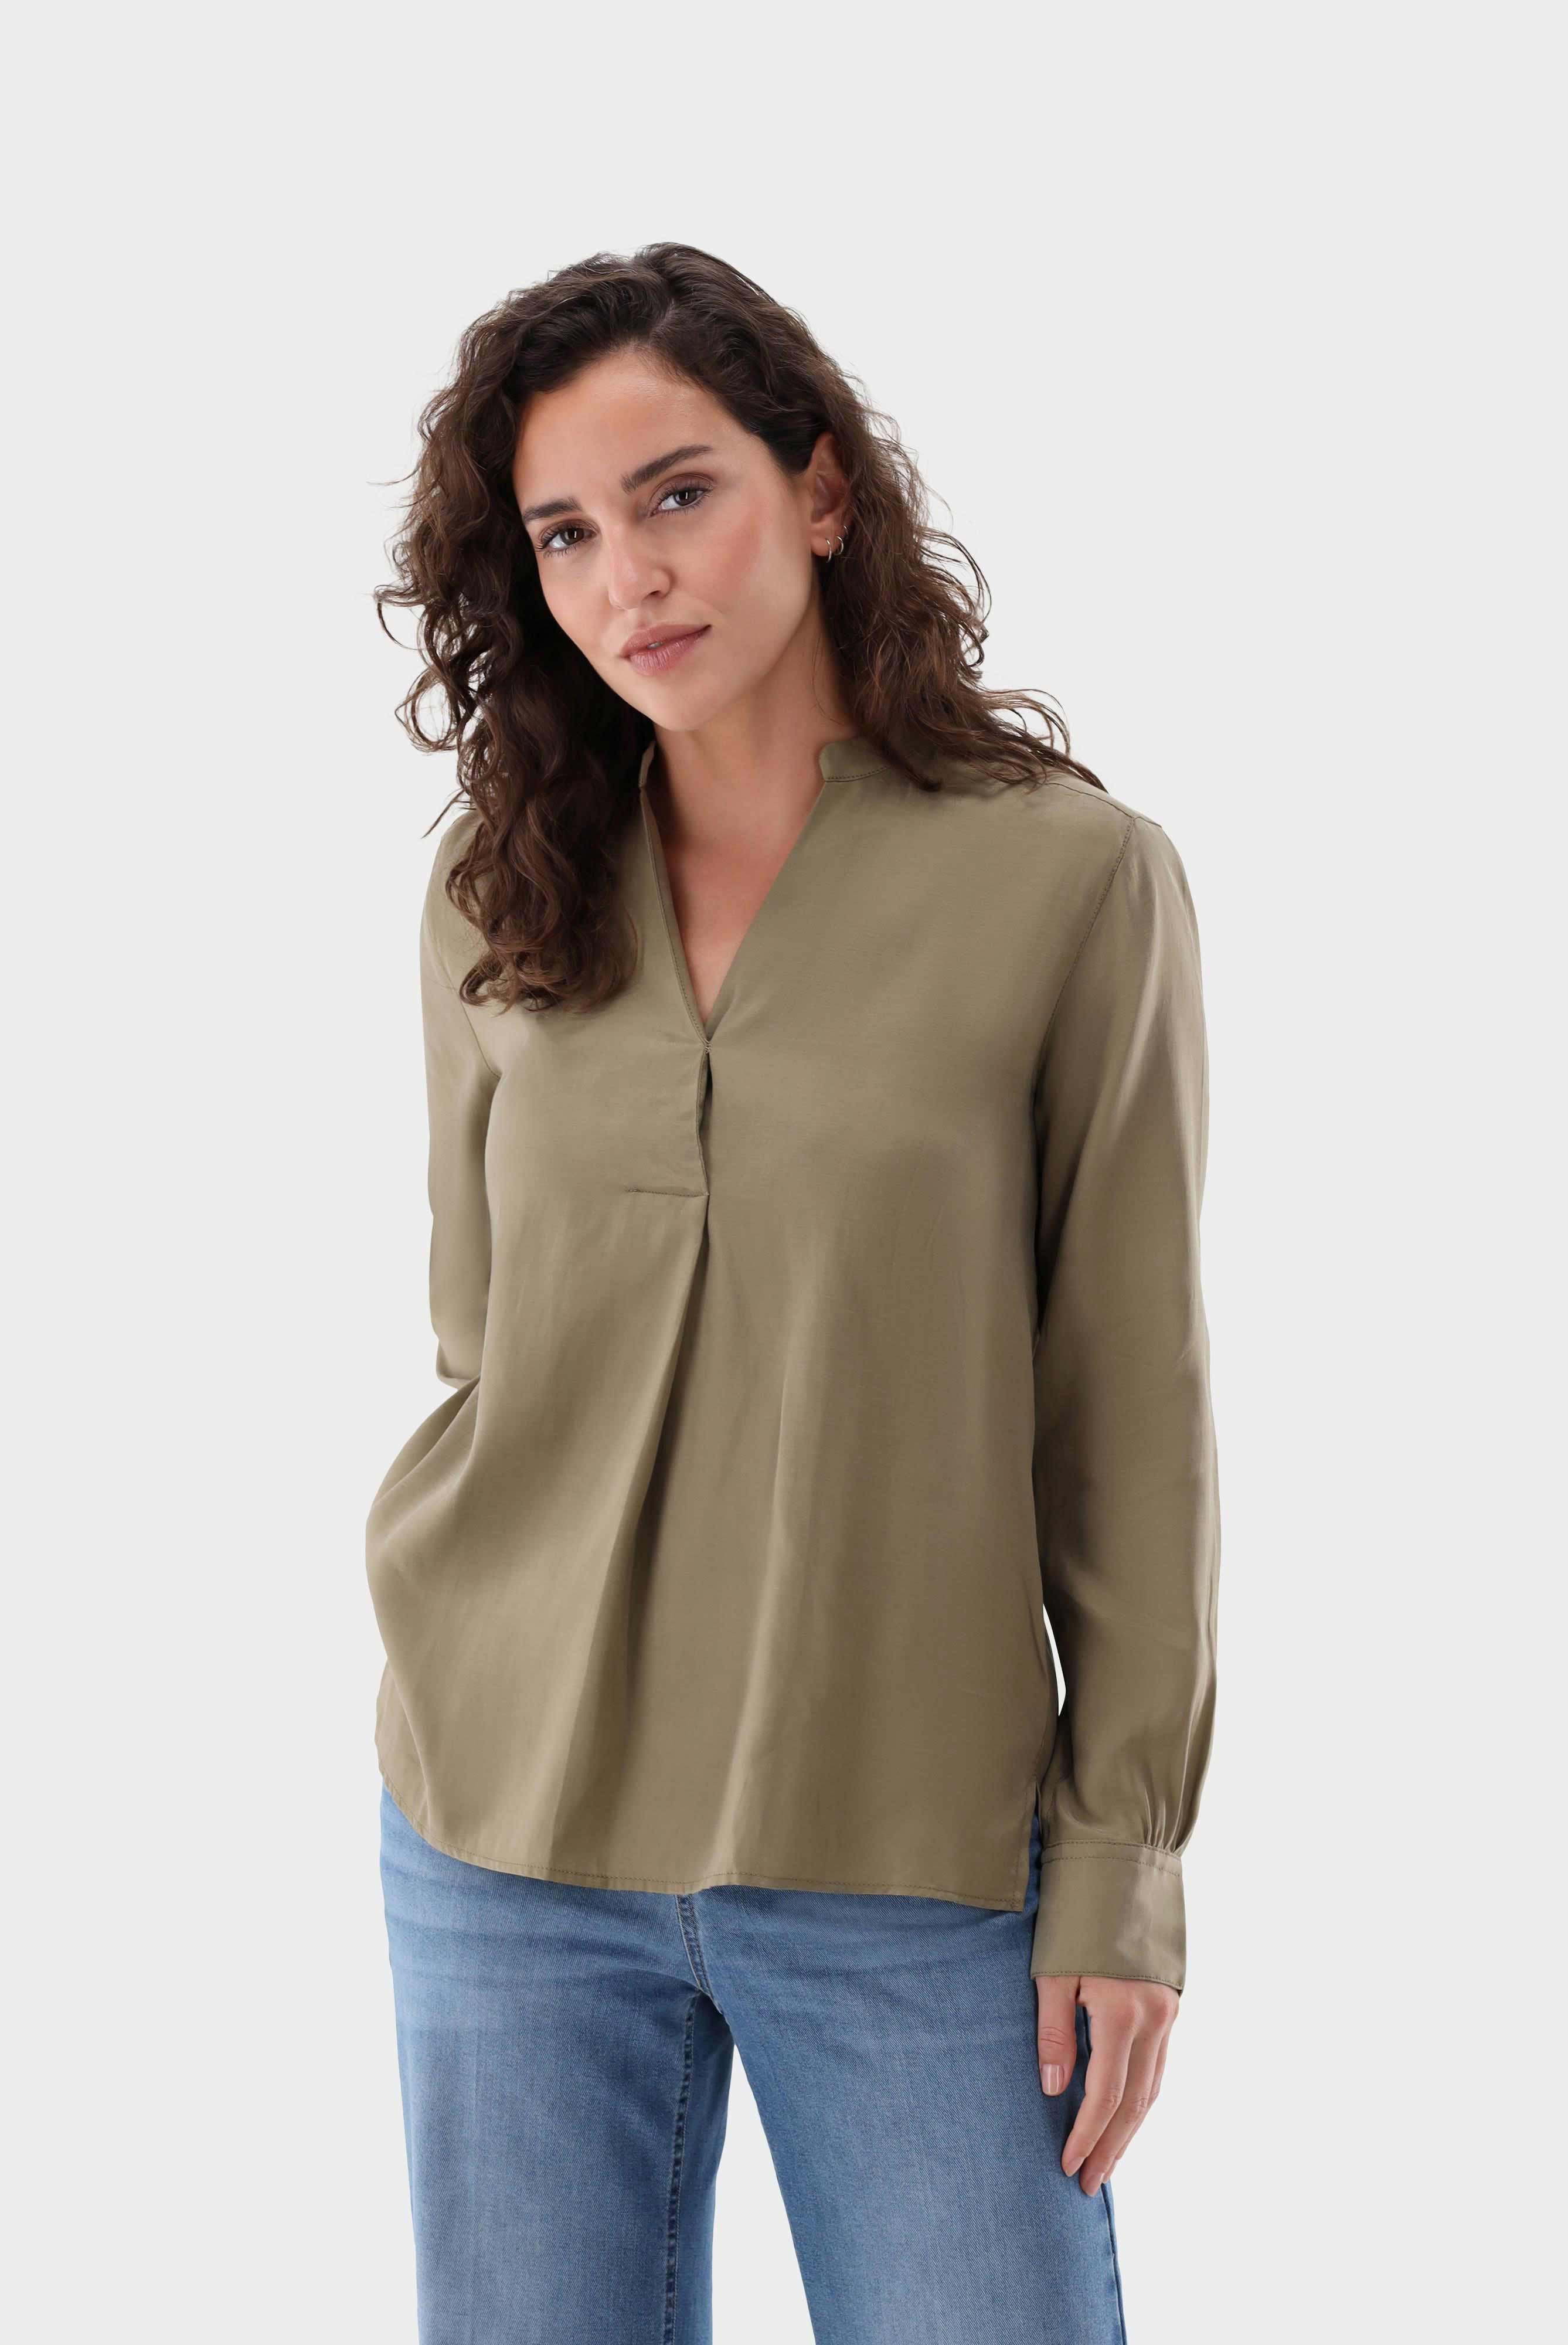 Casual Blouses+Stand-up Collar Shirt with lyocell and cotton+05.527Y.49.150258.960.32